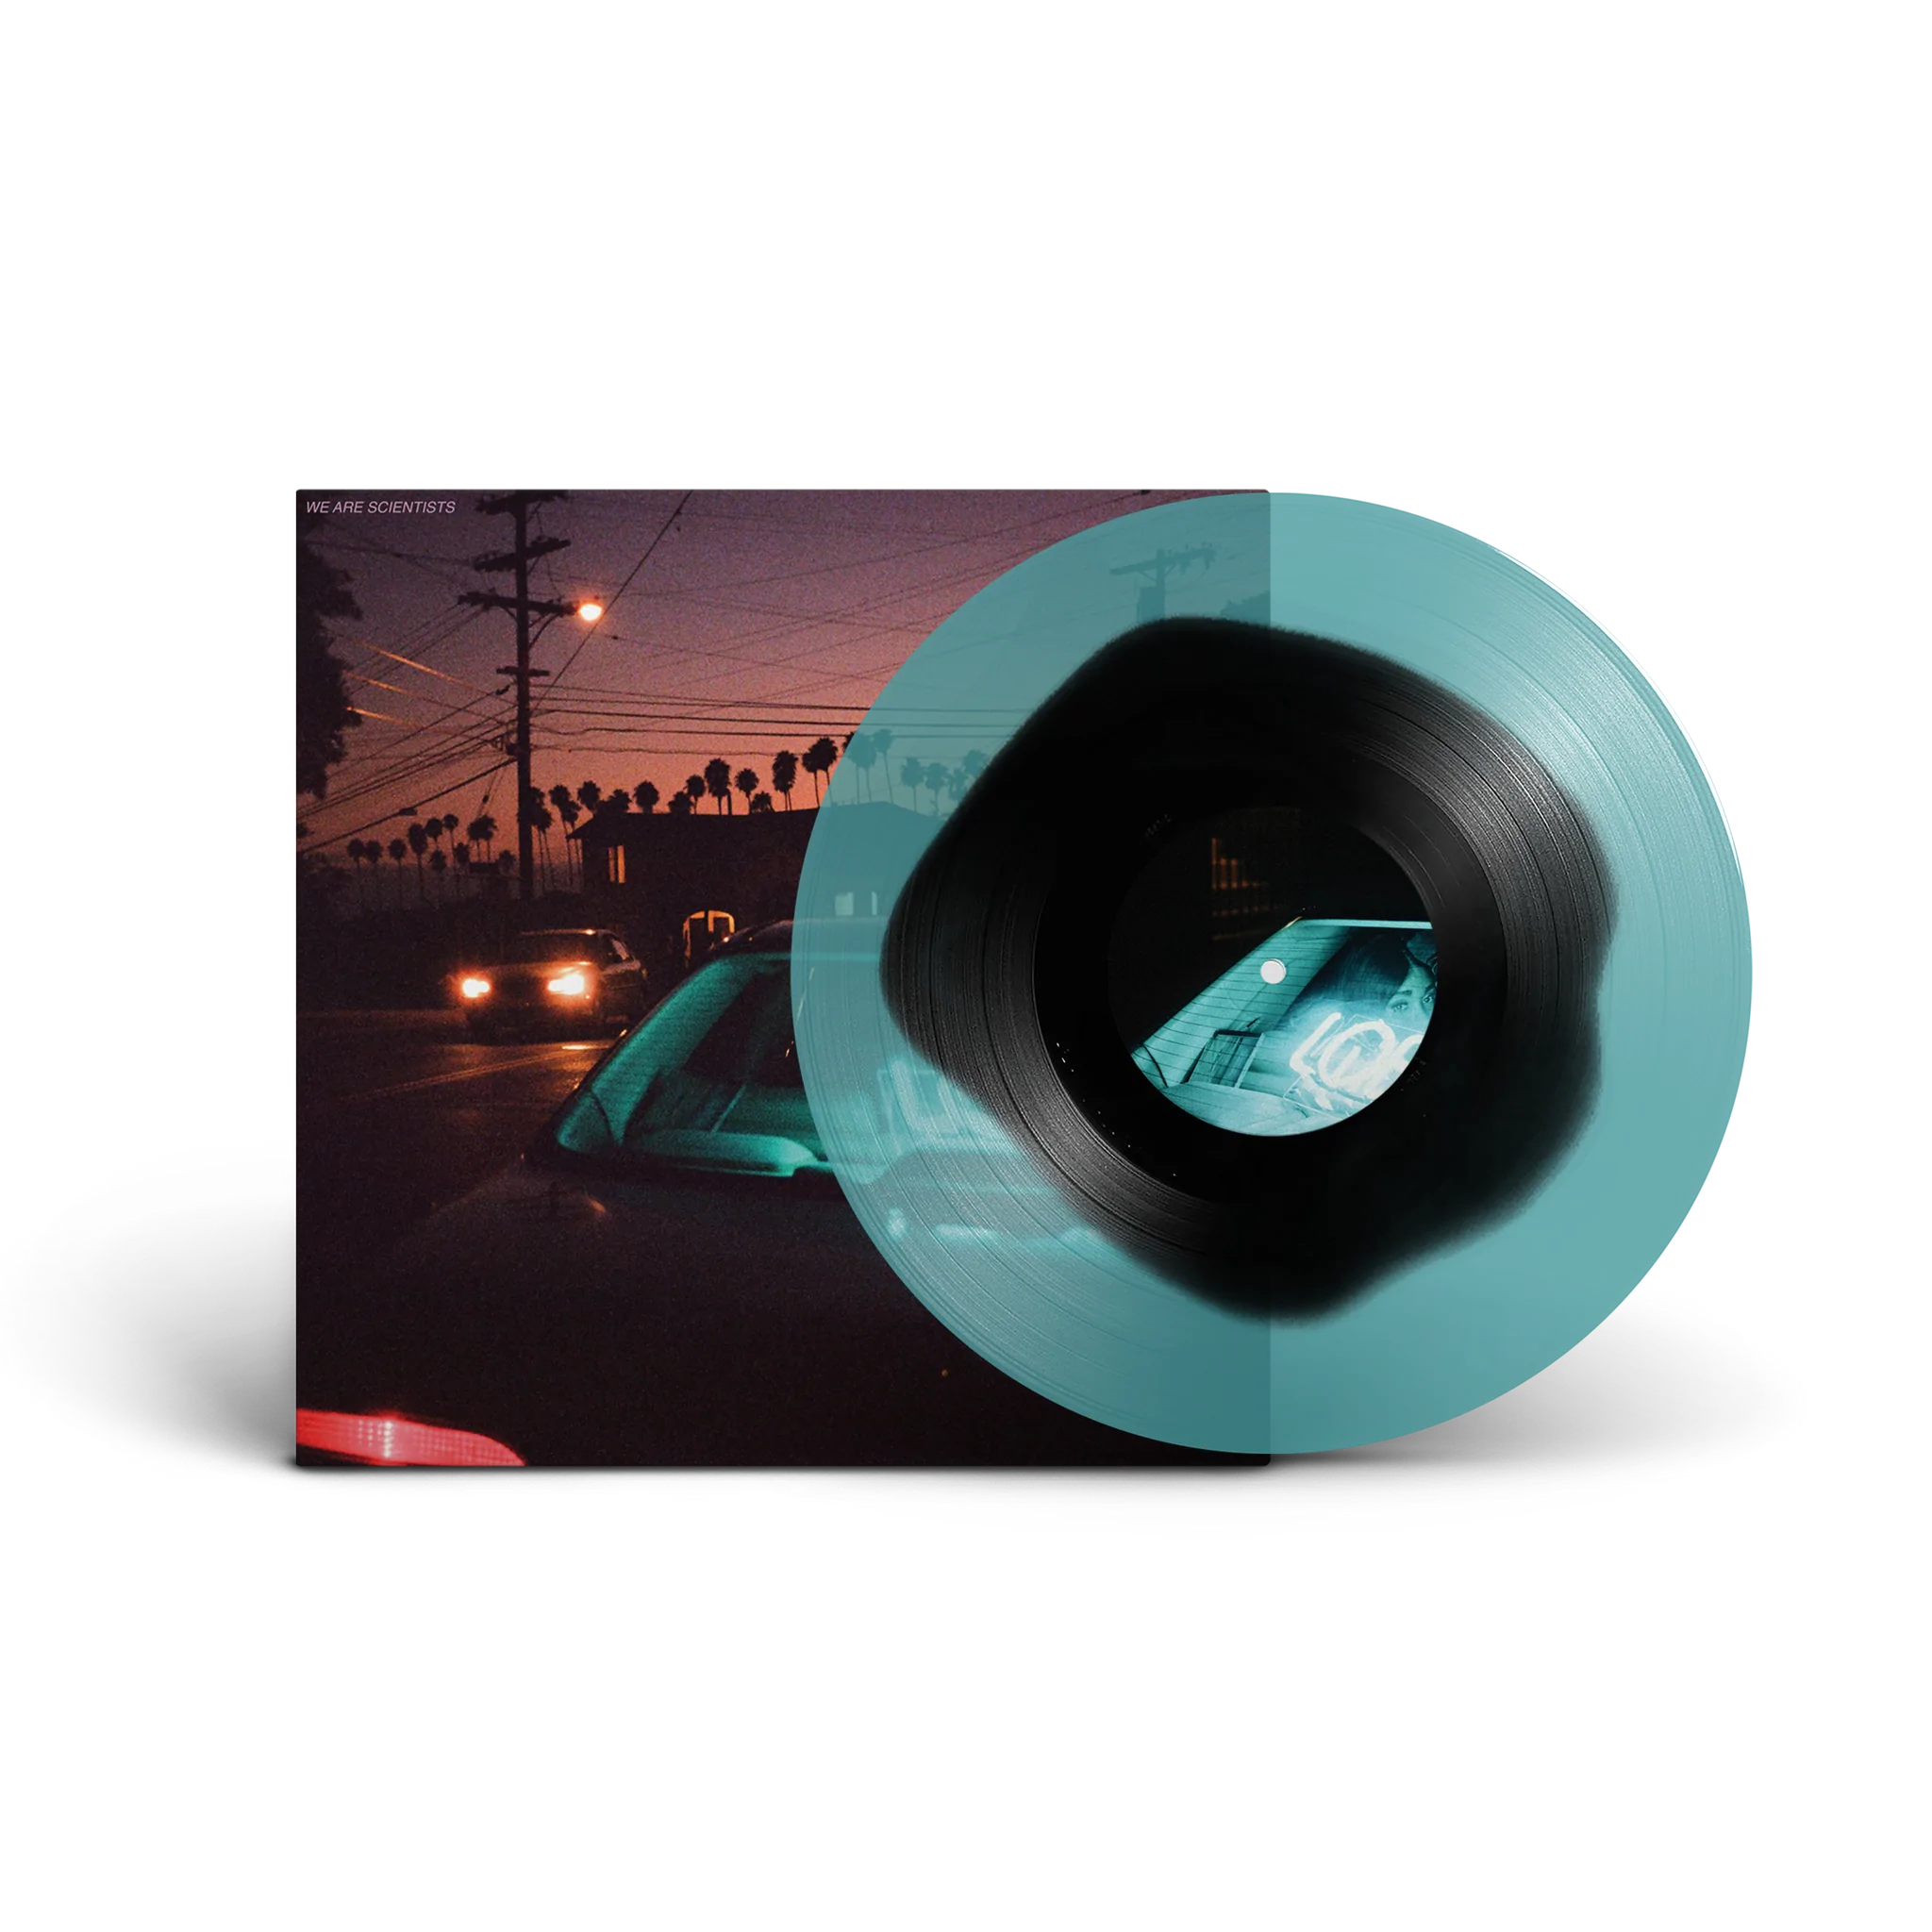 We Are Scientists | LOBES Limited Edition Black Lobe in a Cathode Blue Bath Vinyl LP